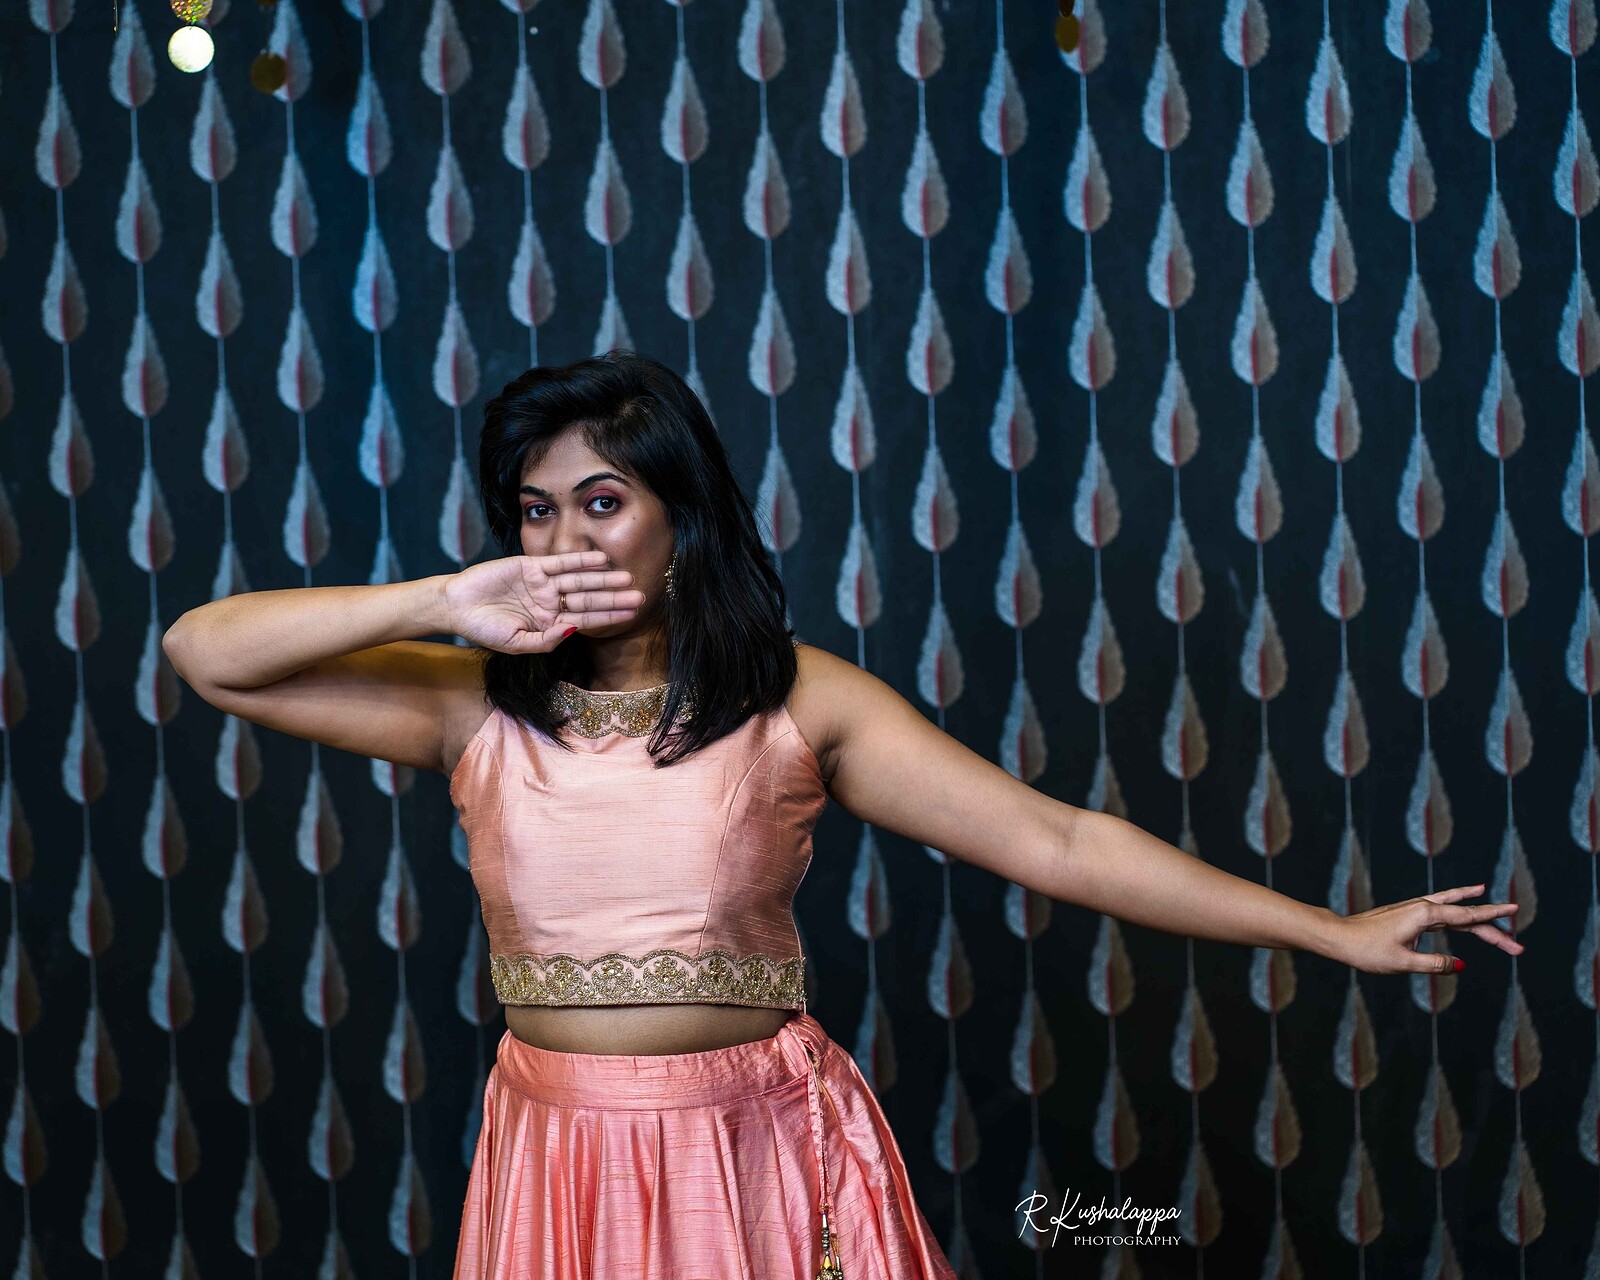 Dancer with back hair and brown skin wears a pink top and skirt. She holds one arm to the side and the other covering her mouth. Behind is a wall with multiple shapes like the pattern of a peacock's tail.